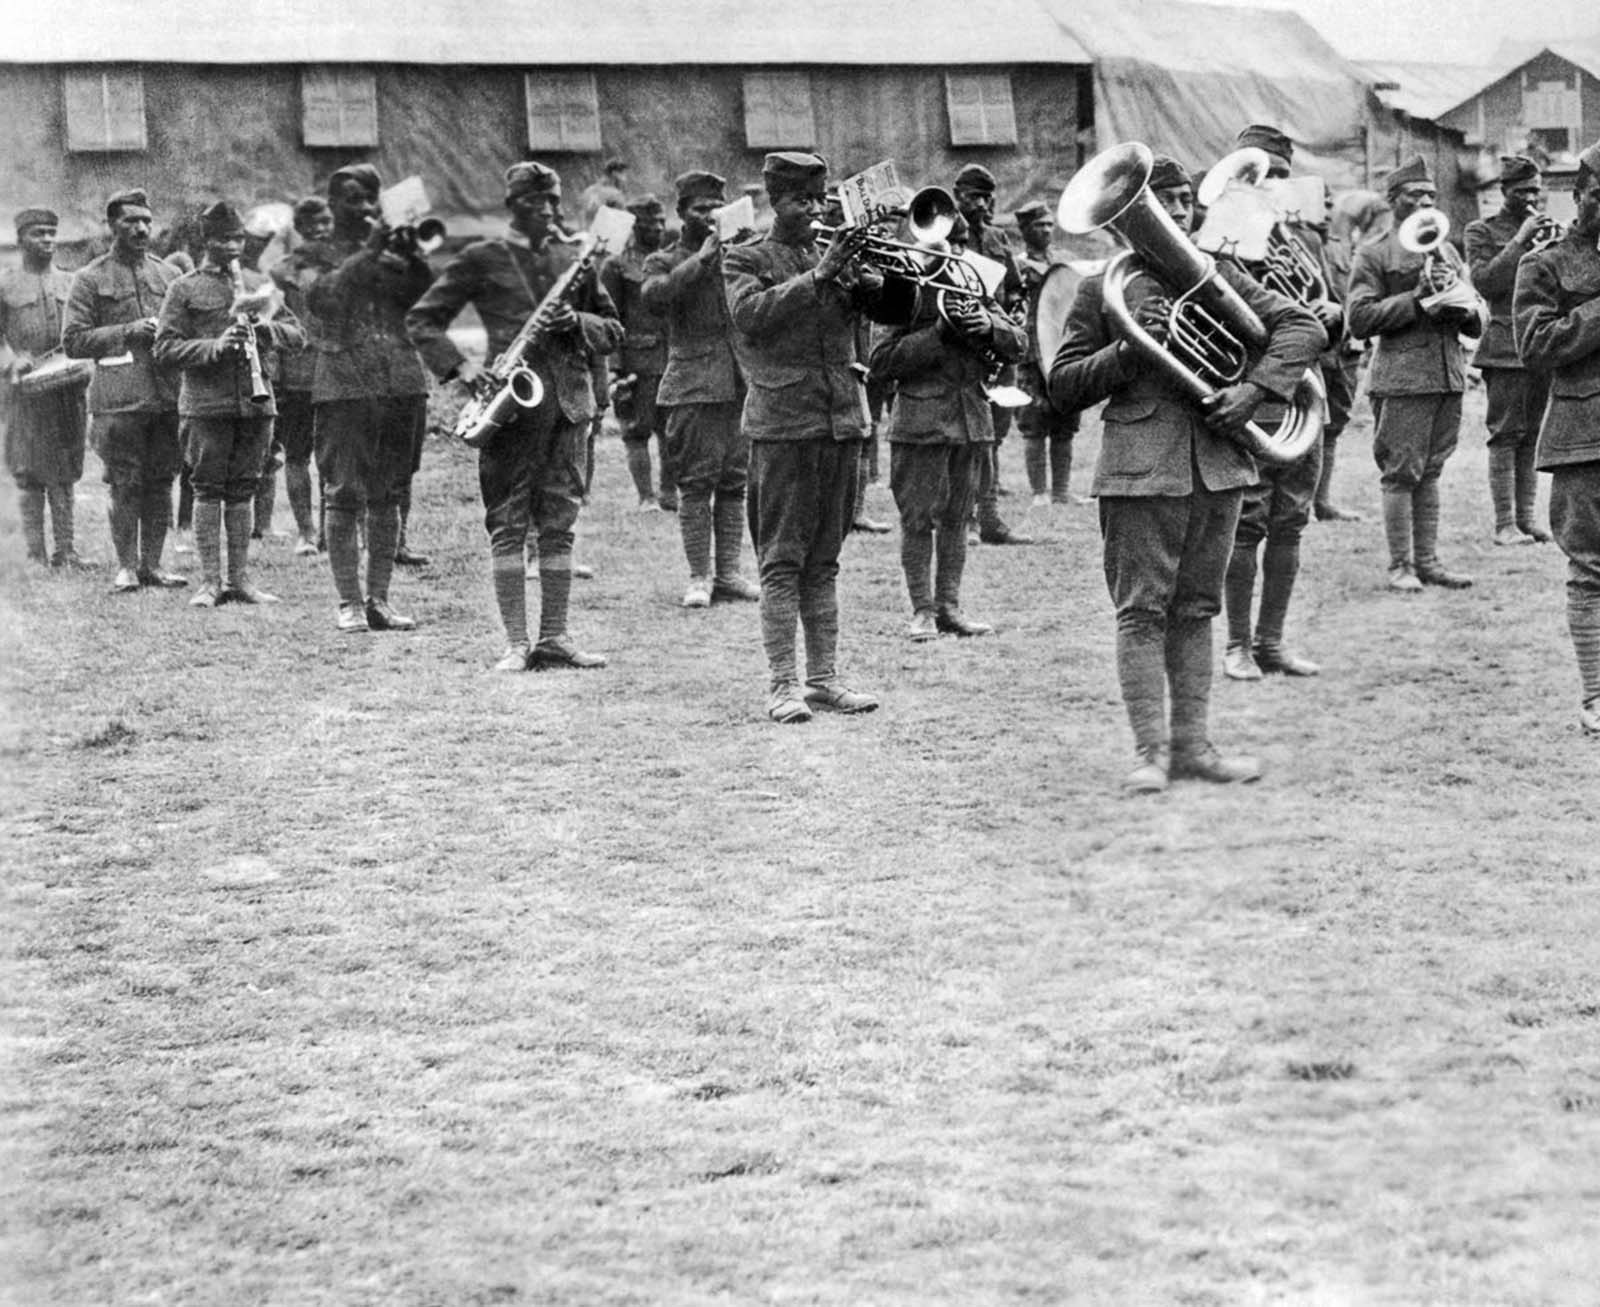 Members of the 369th Infantry band perform under the direction of Lt. James Reese Europe in France.